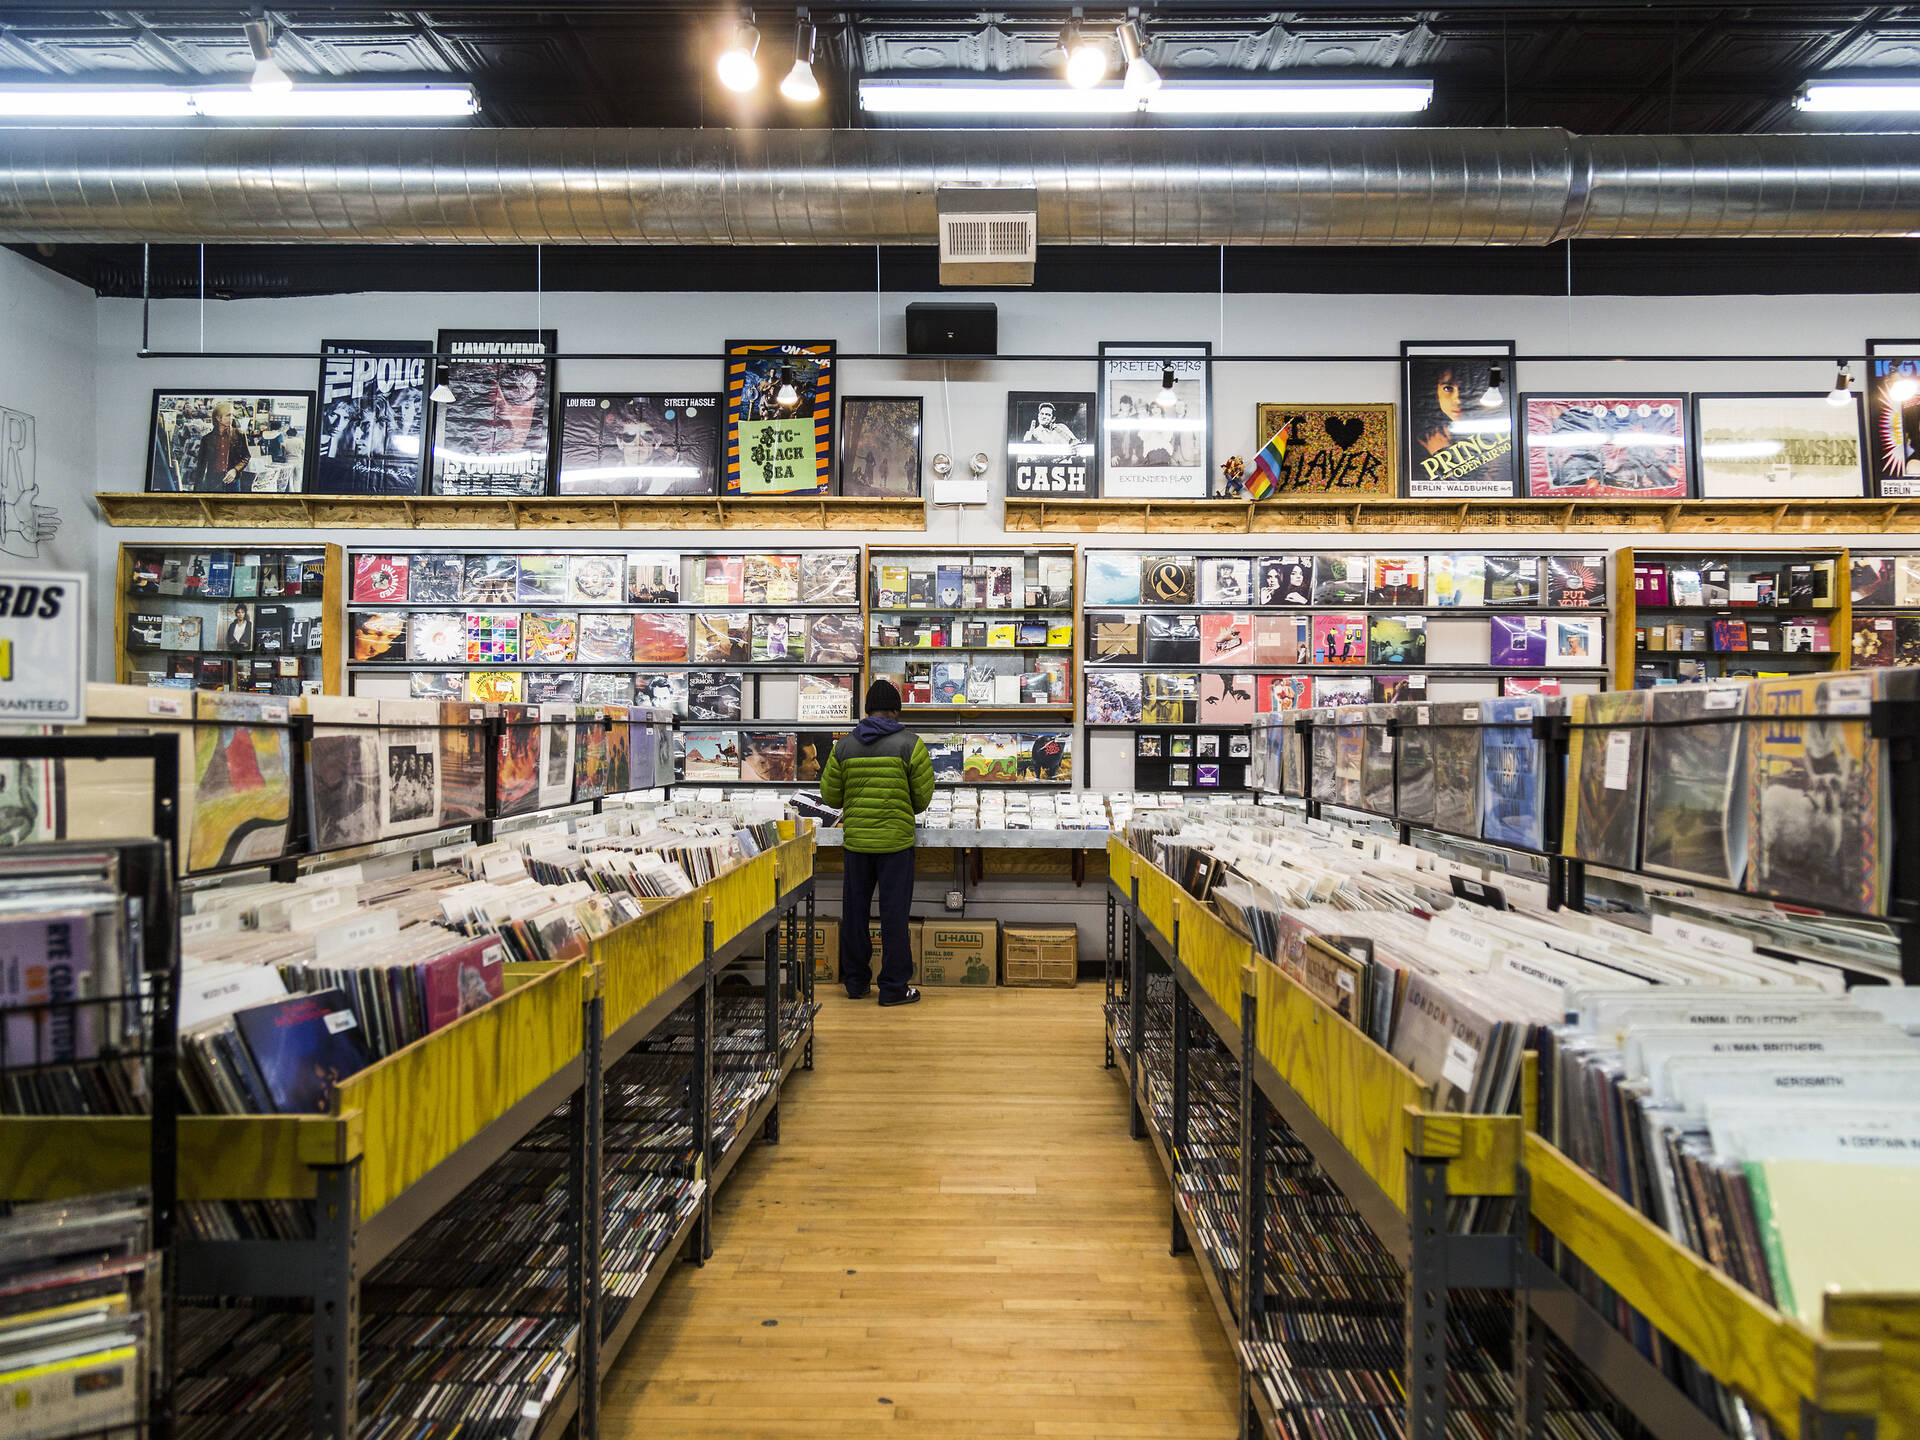 20 Best Record Stores in Chicago for Vinyl, CDs and More